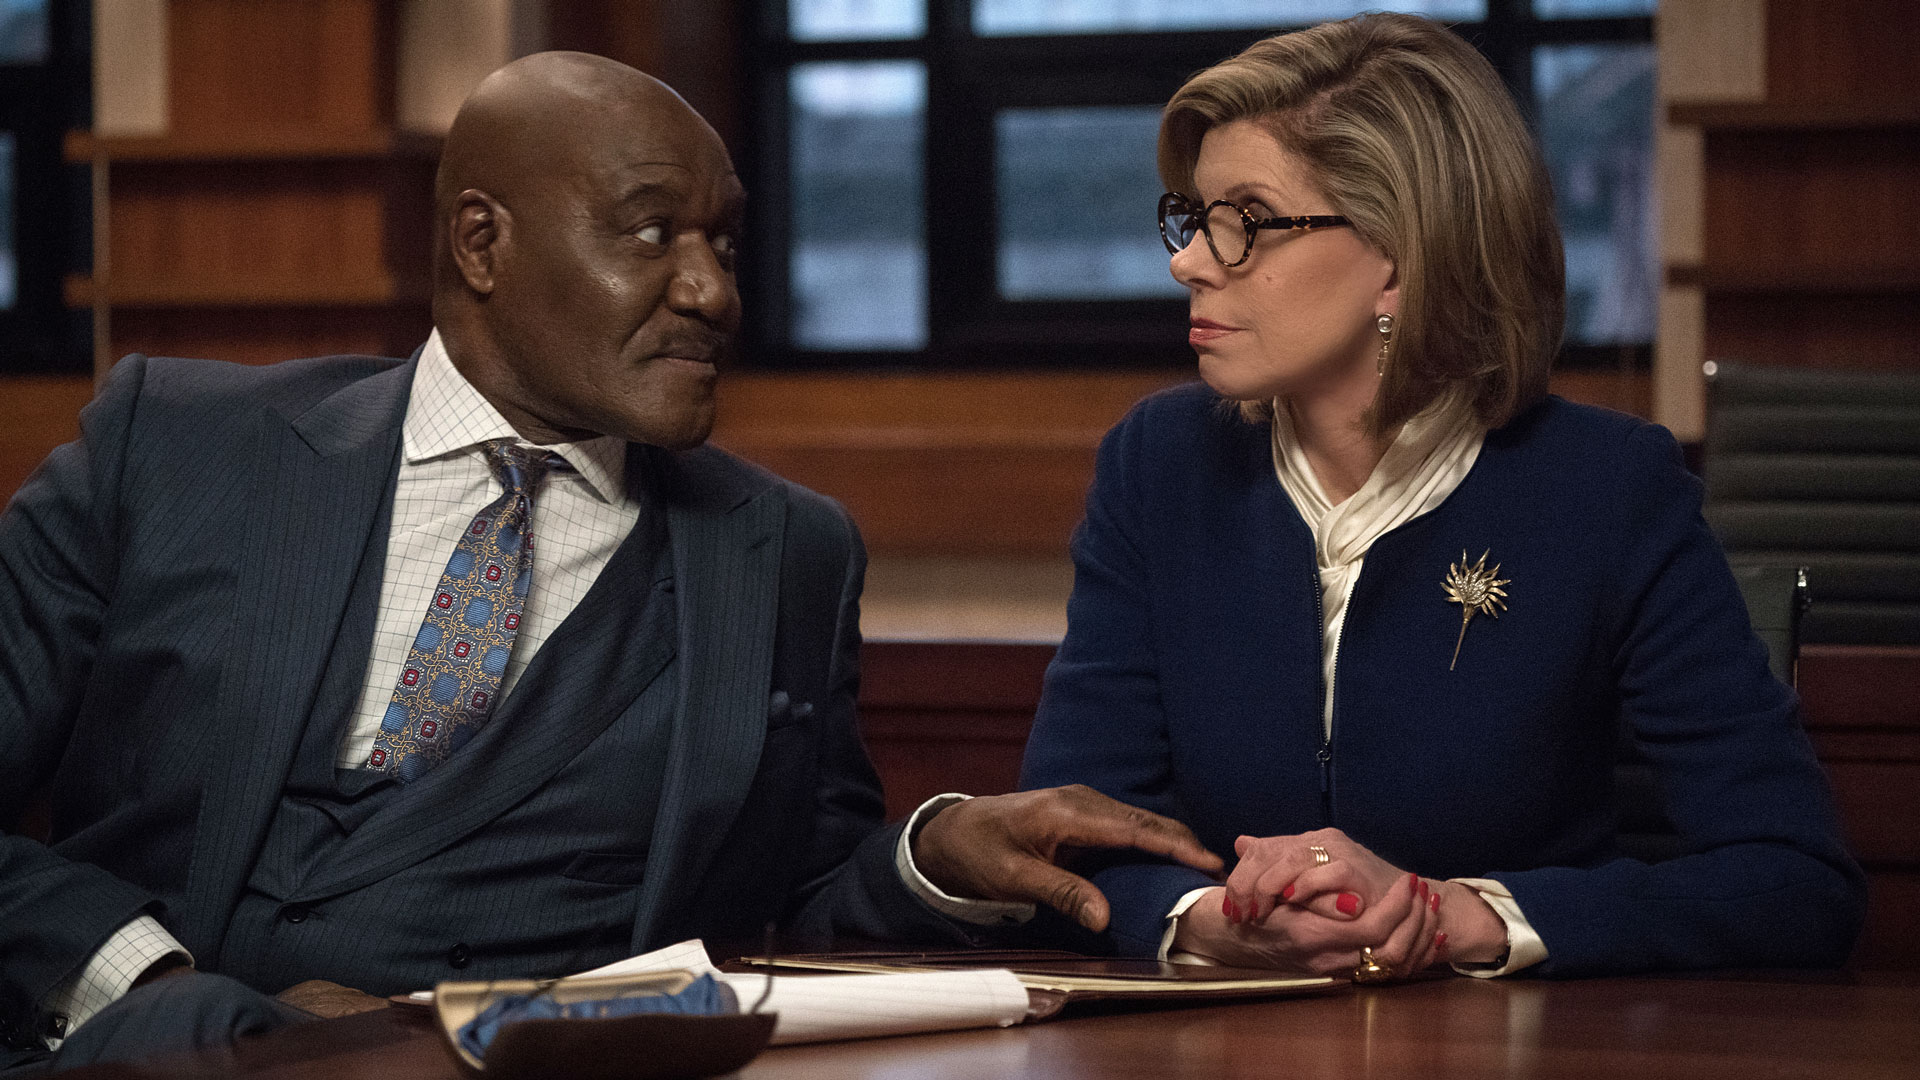 The Good Fight Season 4 Episode 6: Everything We Know